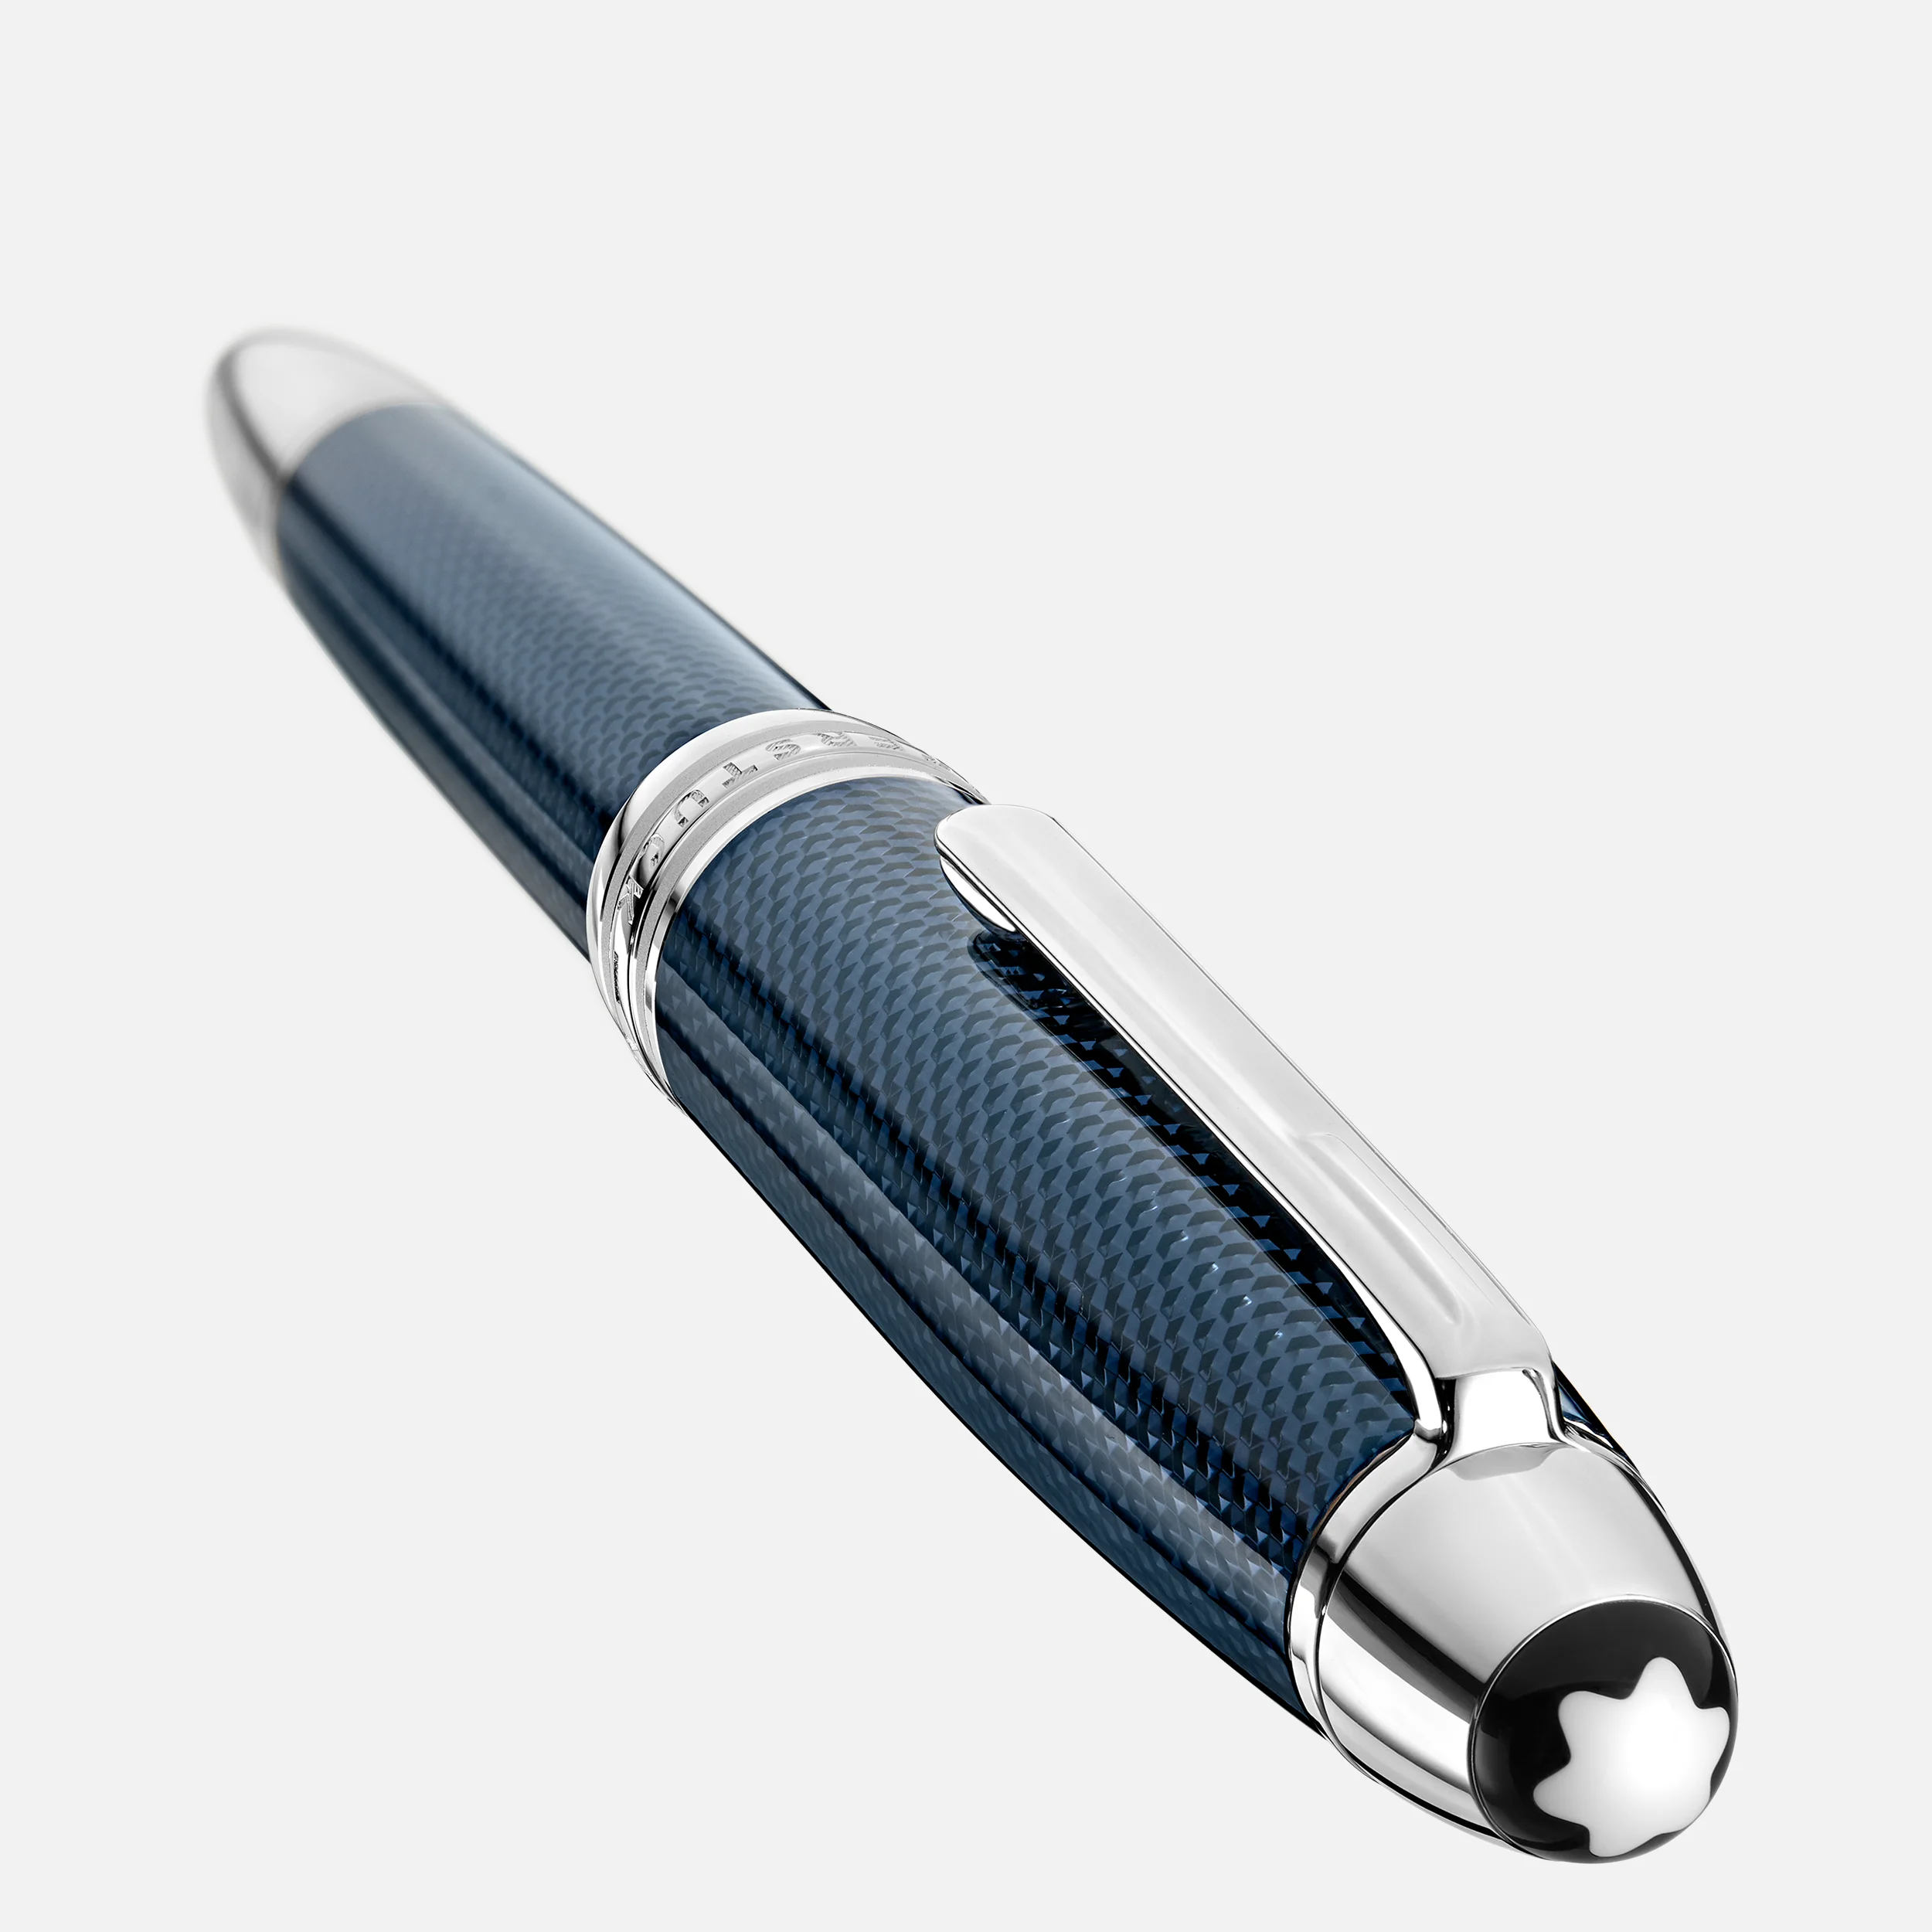 Montblanc Meisterstuck Solitaire Blue Hour LeGrand Rollerball - Pencraft the boutique